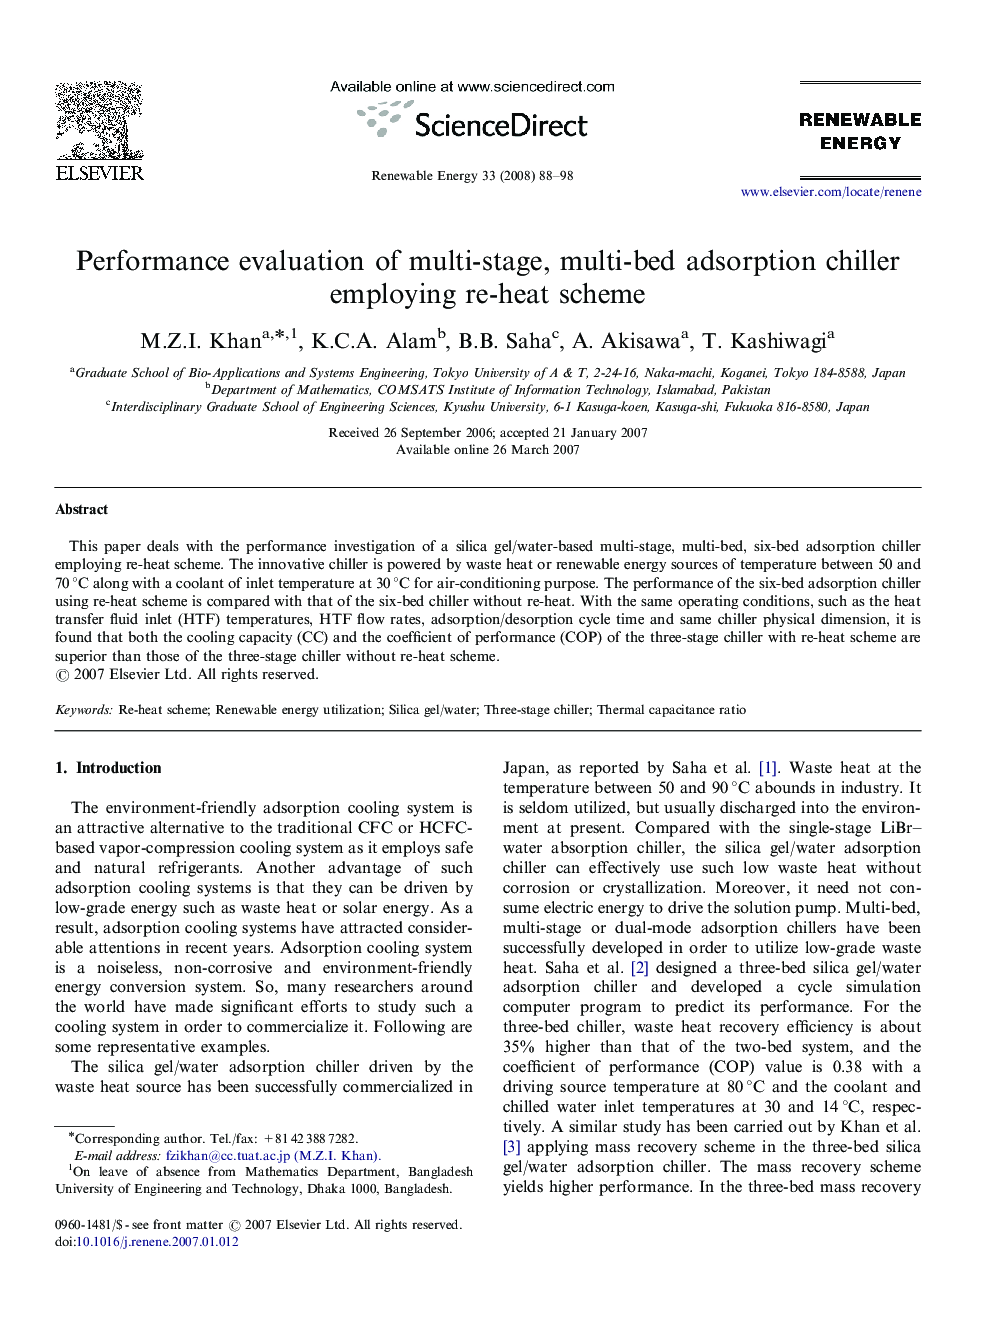 Performance evaluation of multi-stage, multi-bed adsorption chiller employing re-heat scheme